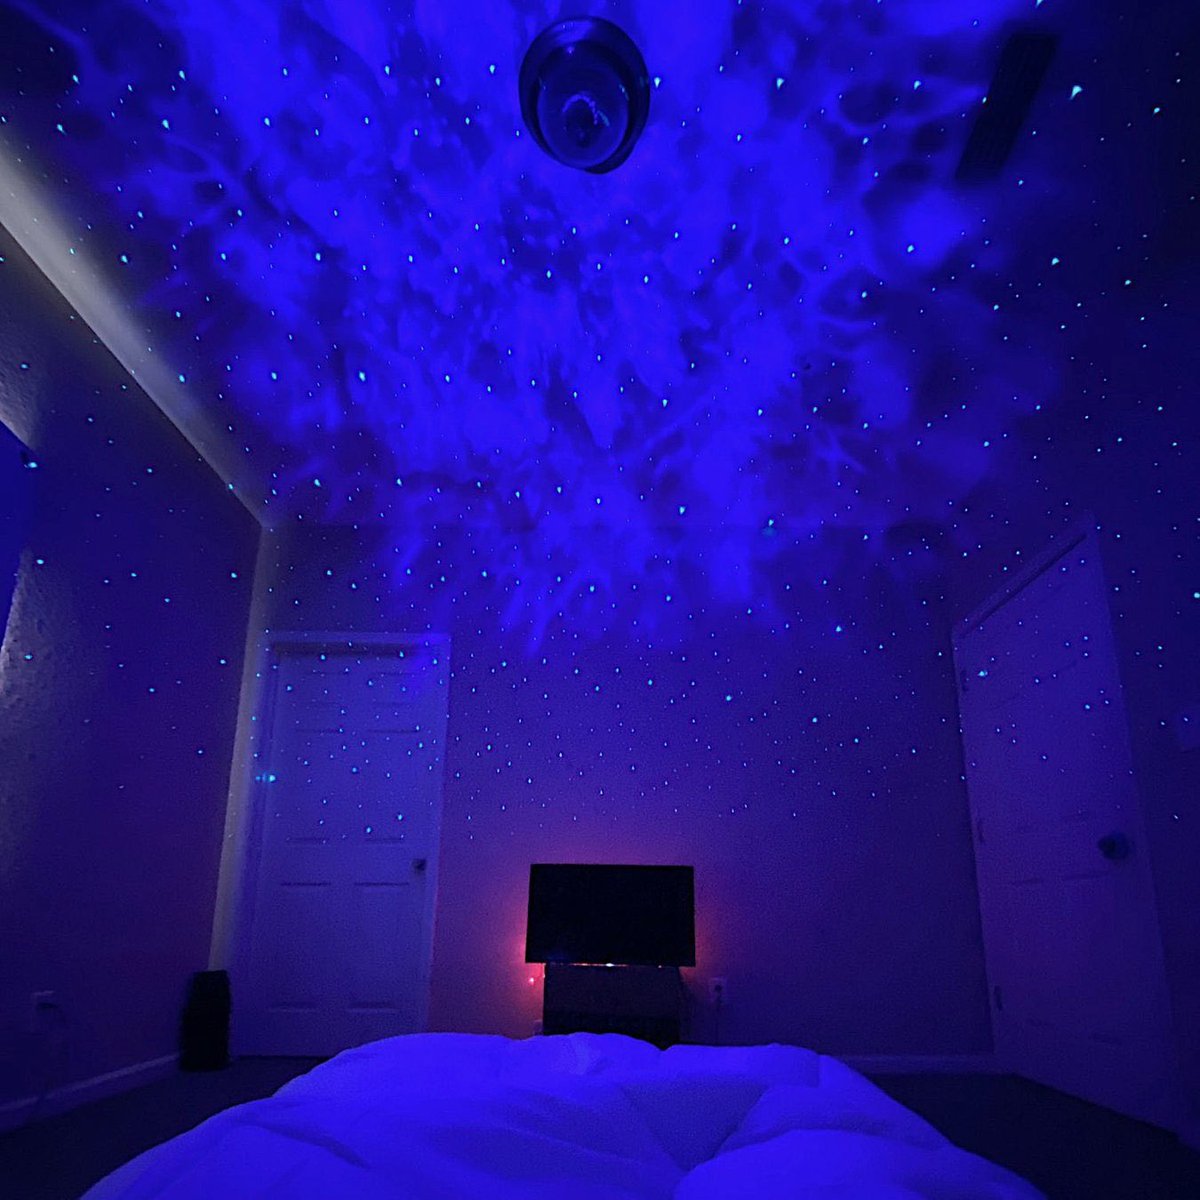 also check this galaxy projector for your rooms !!  https://oceangalaxylight.shop/products/light 